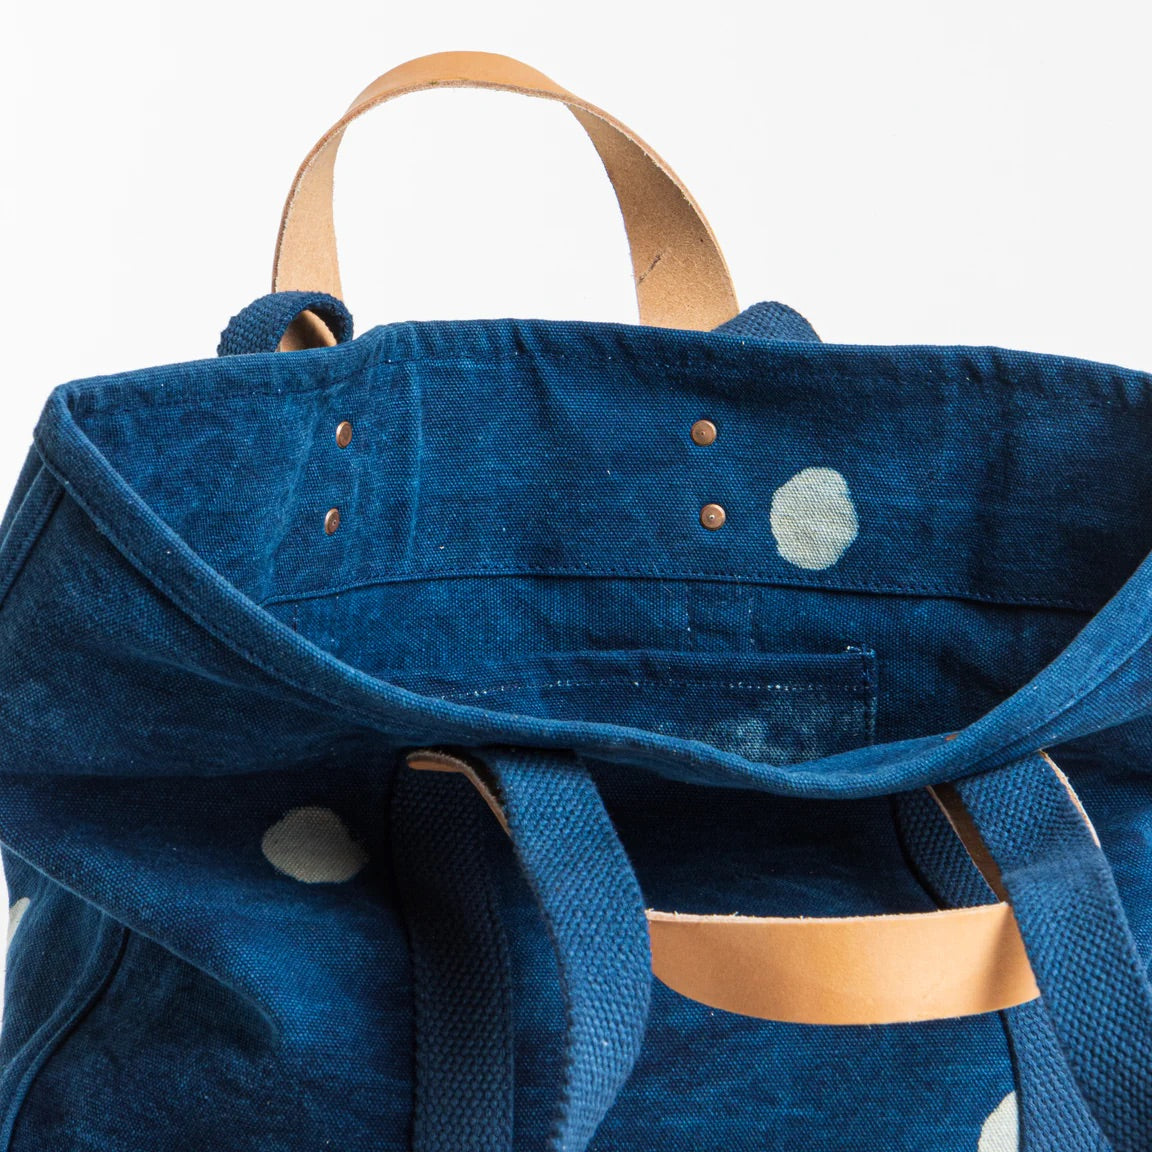 Small East West Tote- Indigo Moon